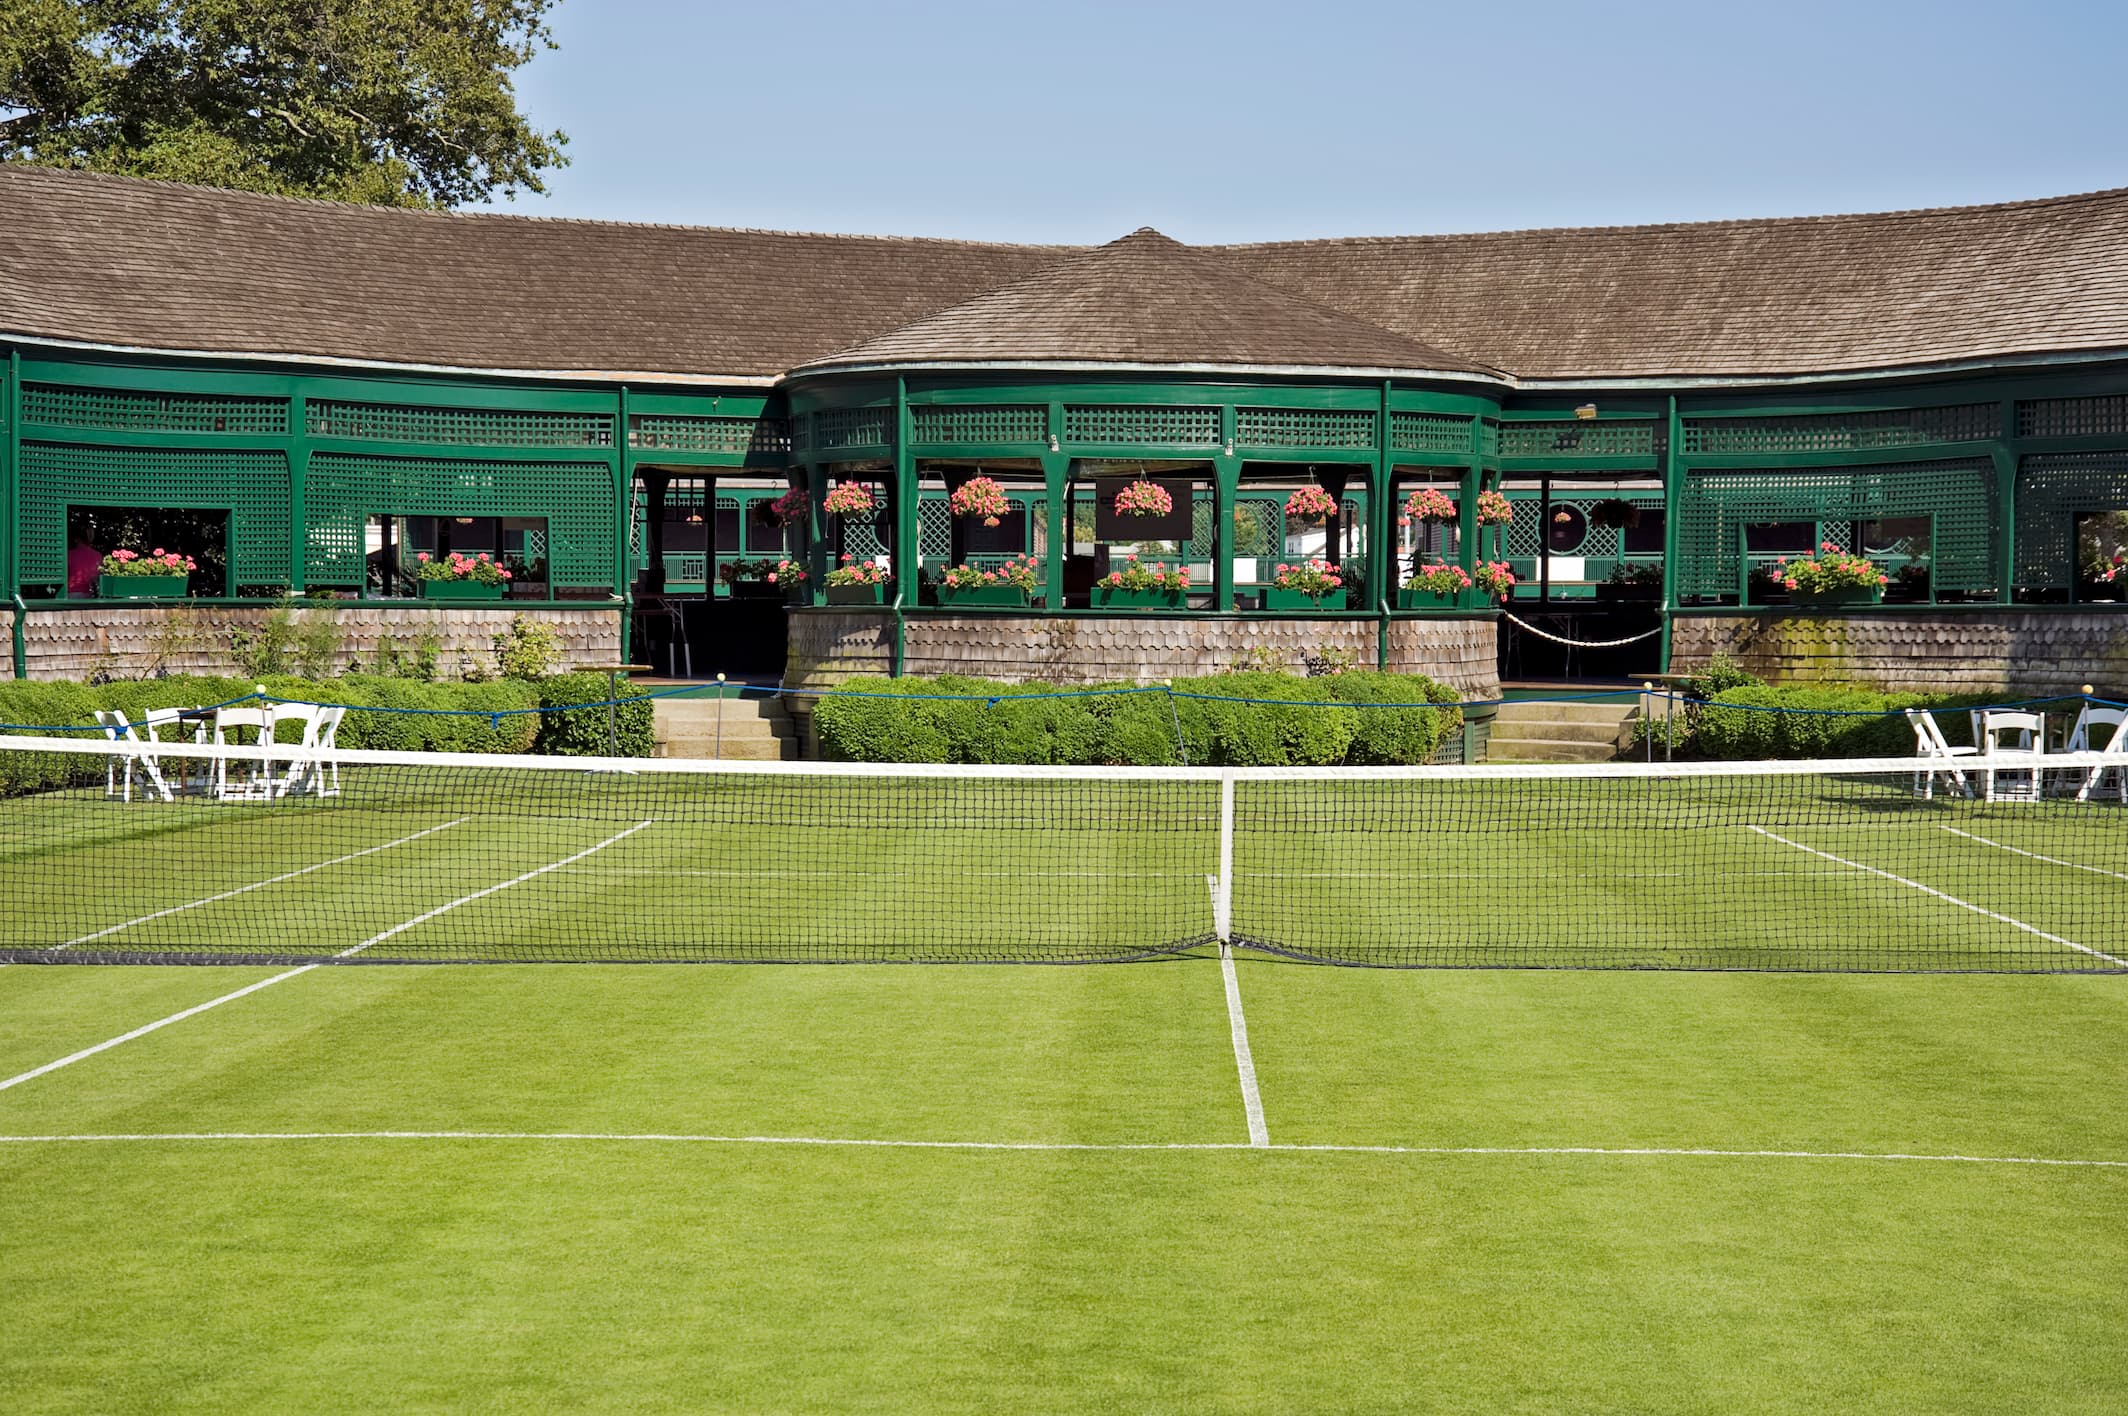 Tennis clubhouse